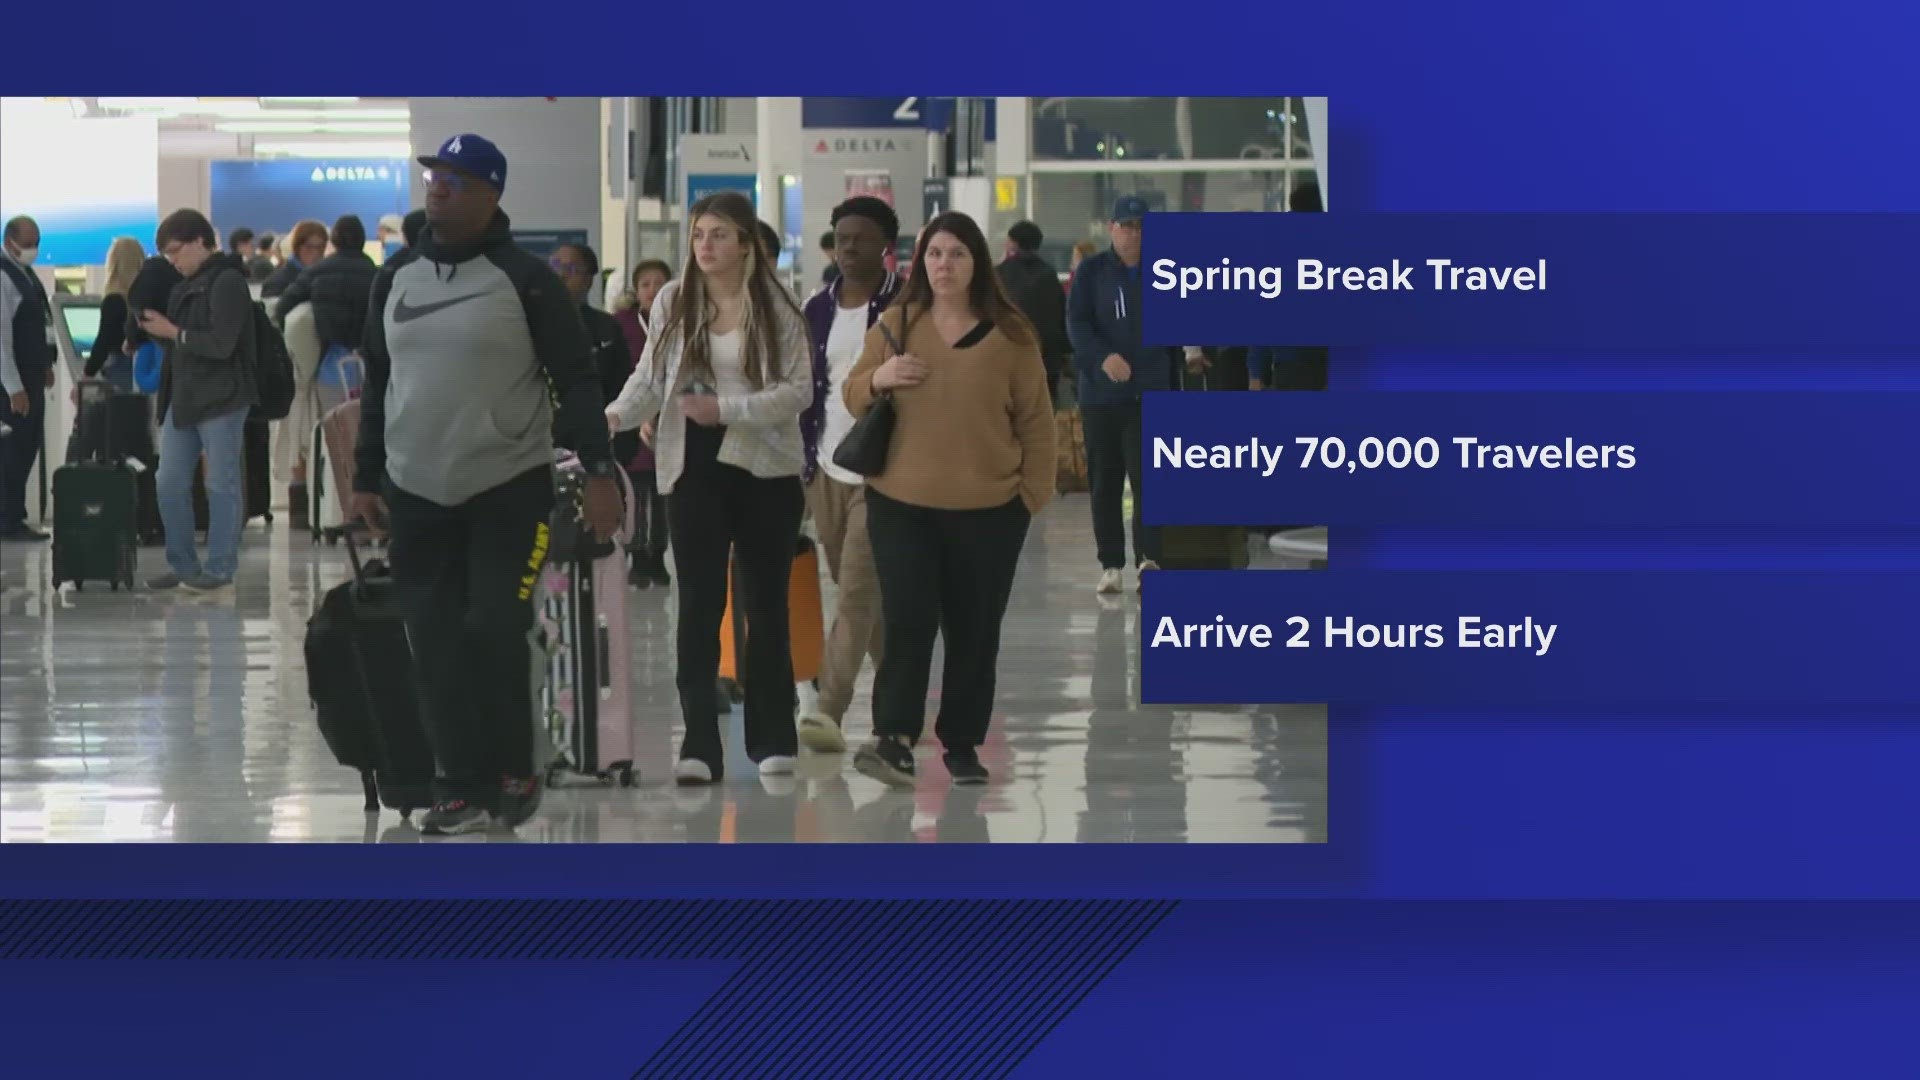 Indianapolis International Airport anticipates passenger numbers will exceed pre-pandemic levels in the coming weeks for spring break.